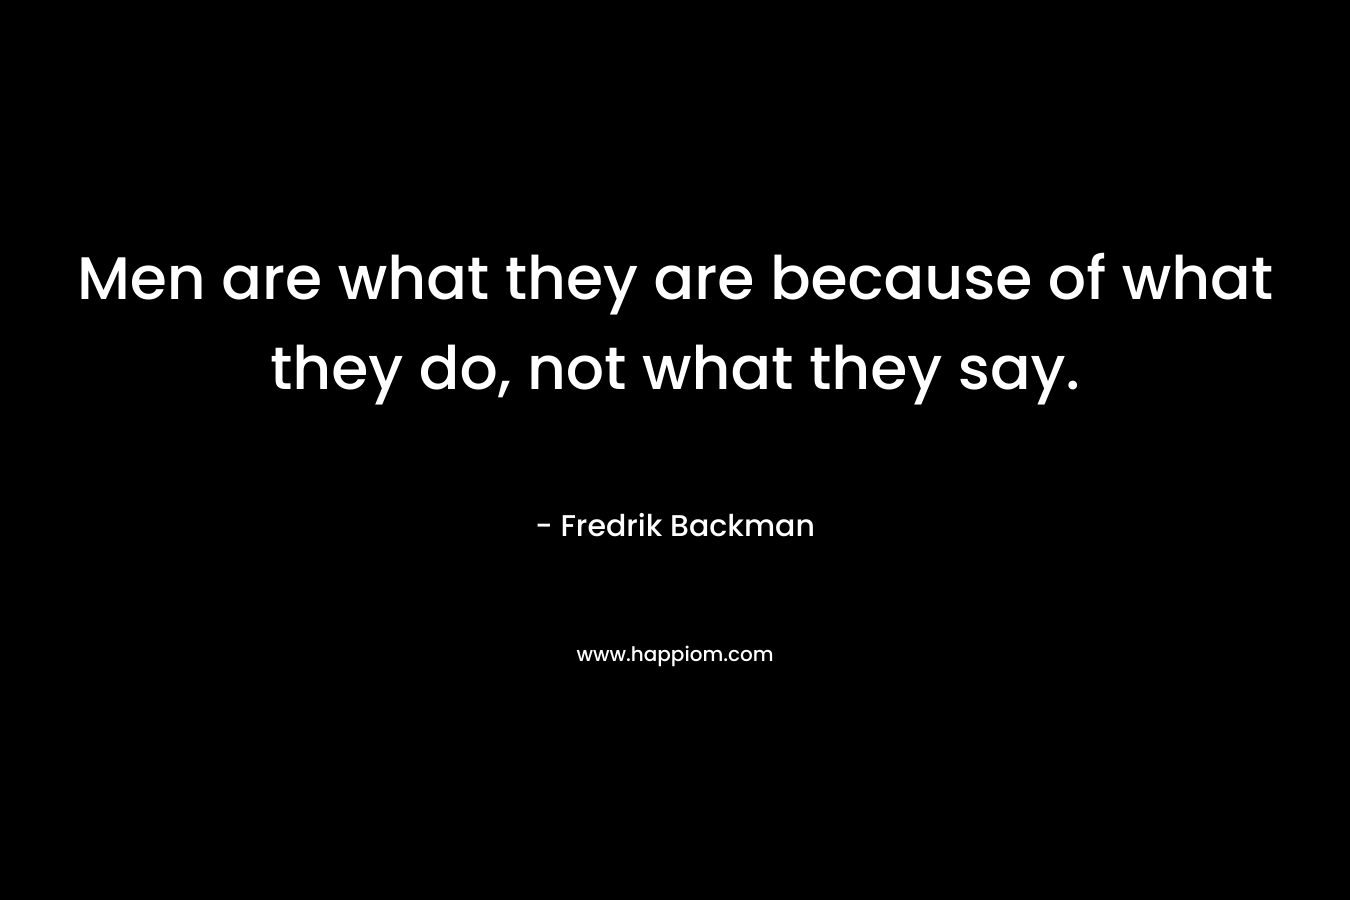 Men are what they are because of what they do, not what they say. – Fredrik Backman